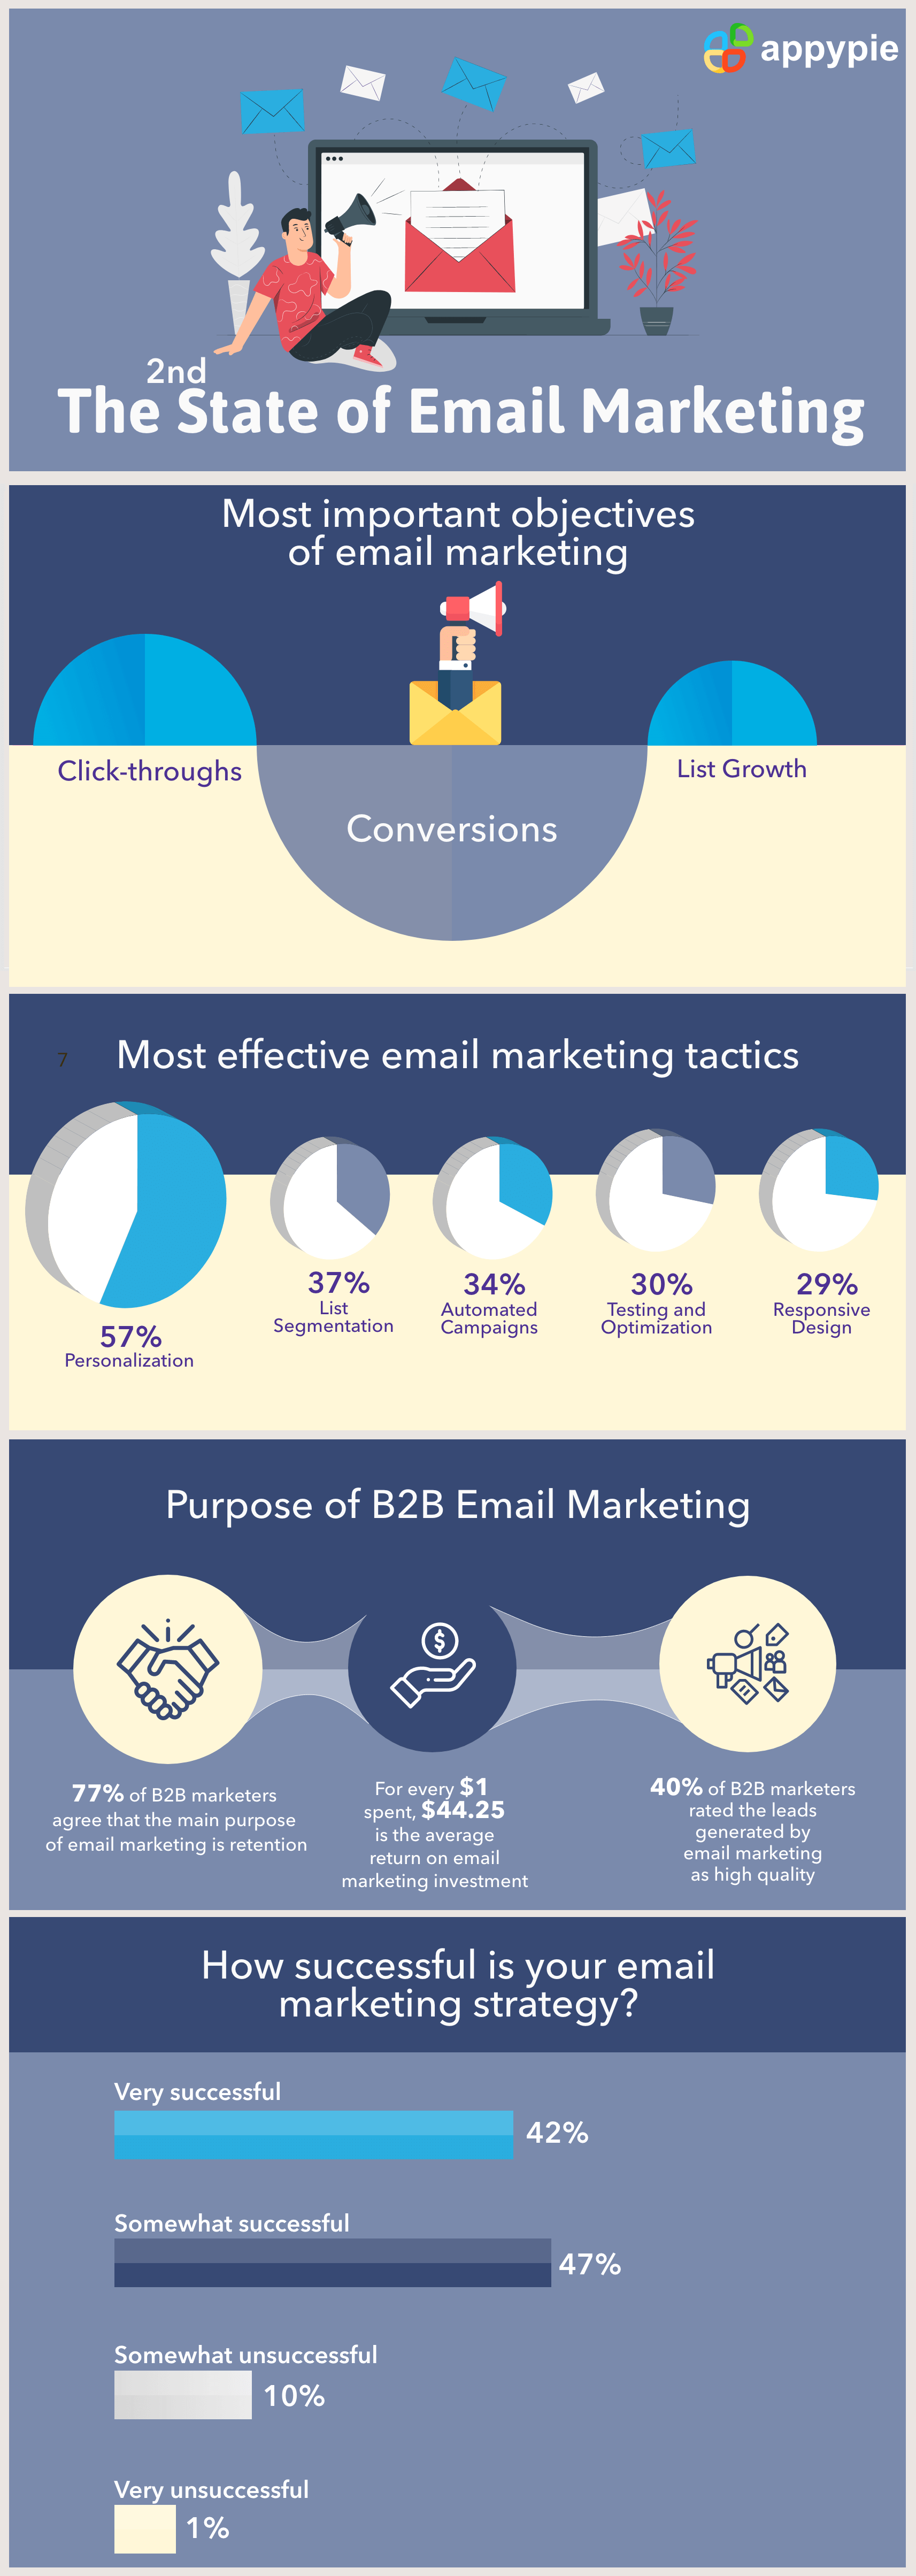 11 Effective Examples of Email Marketing Campaigns - Appy Pie